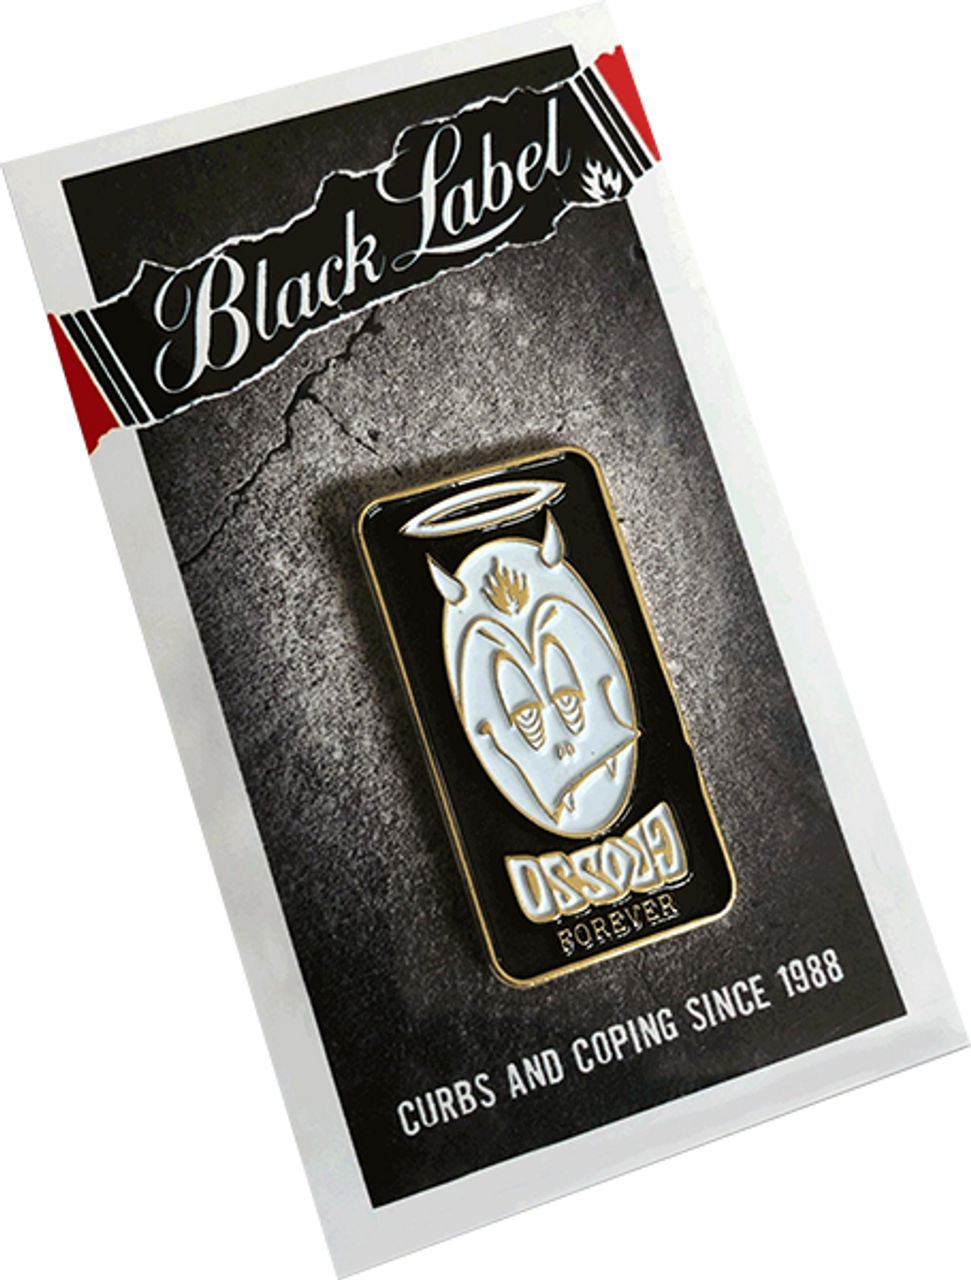 BLACK LABEL GROSSO FOREVER LAPEL PIN